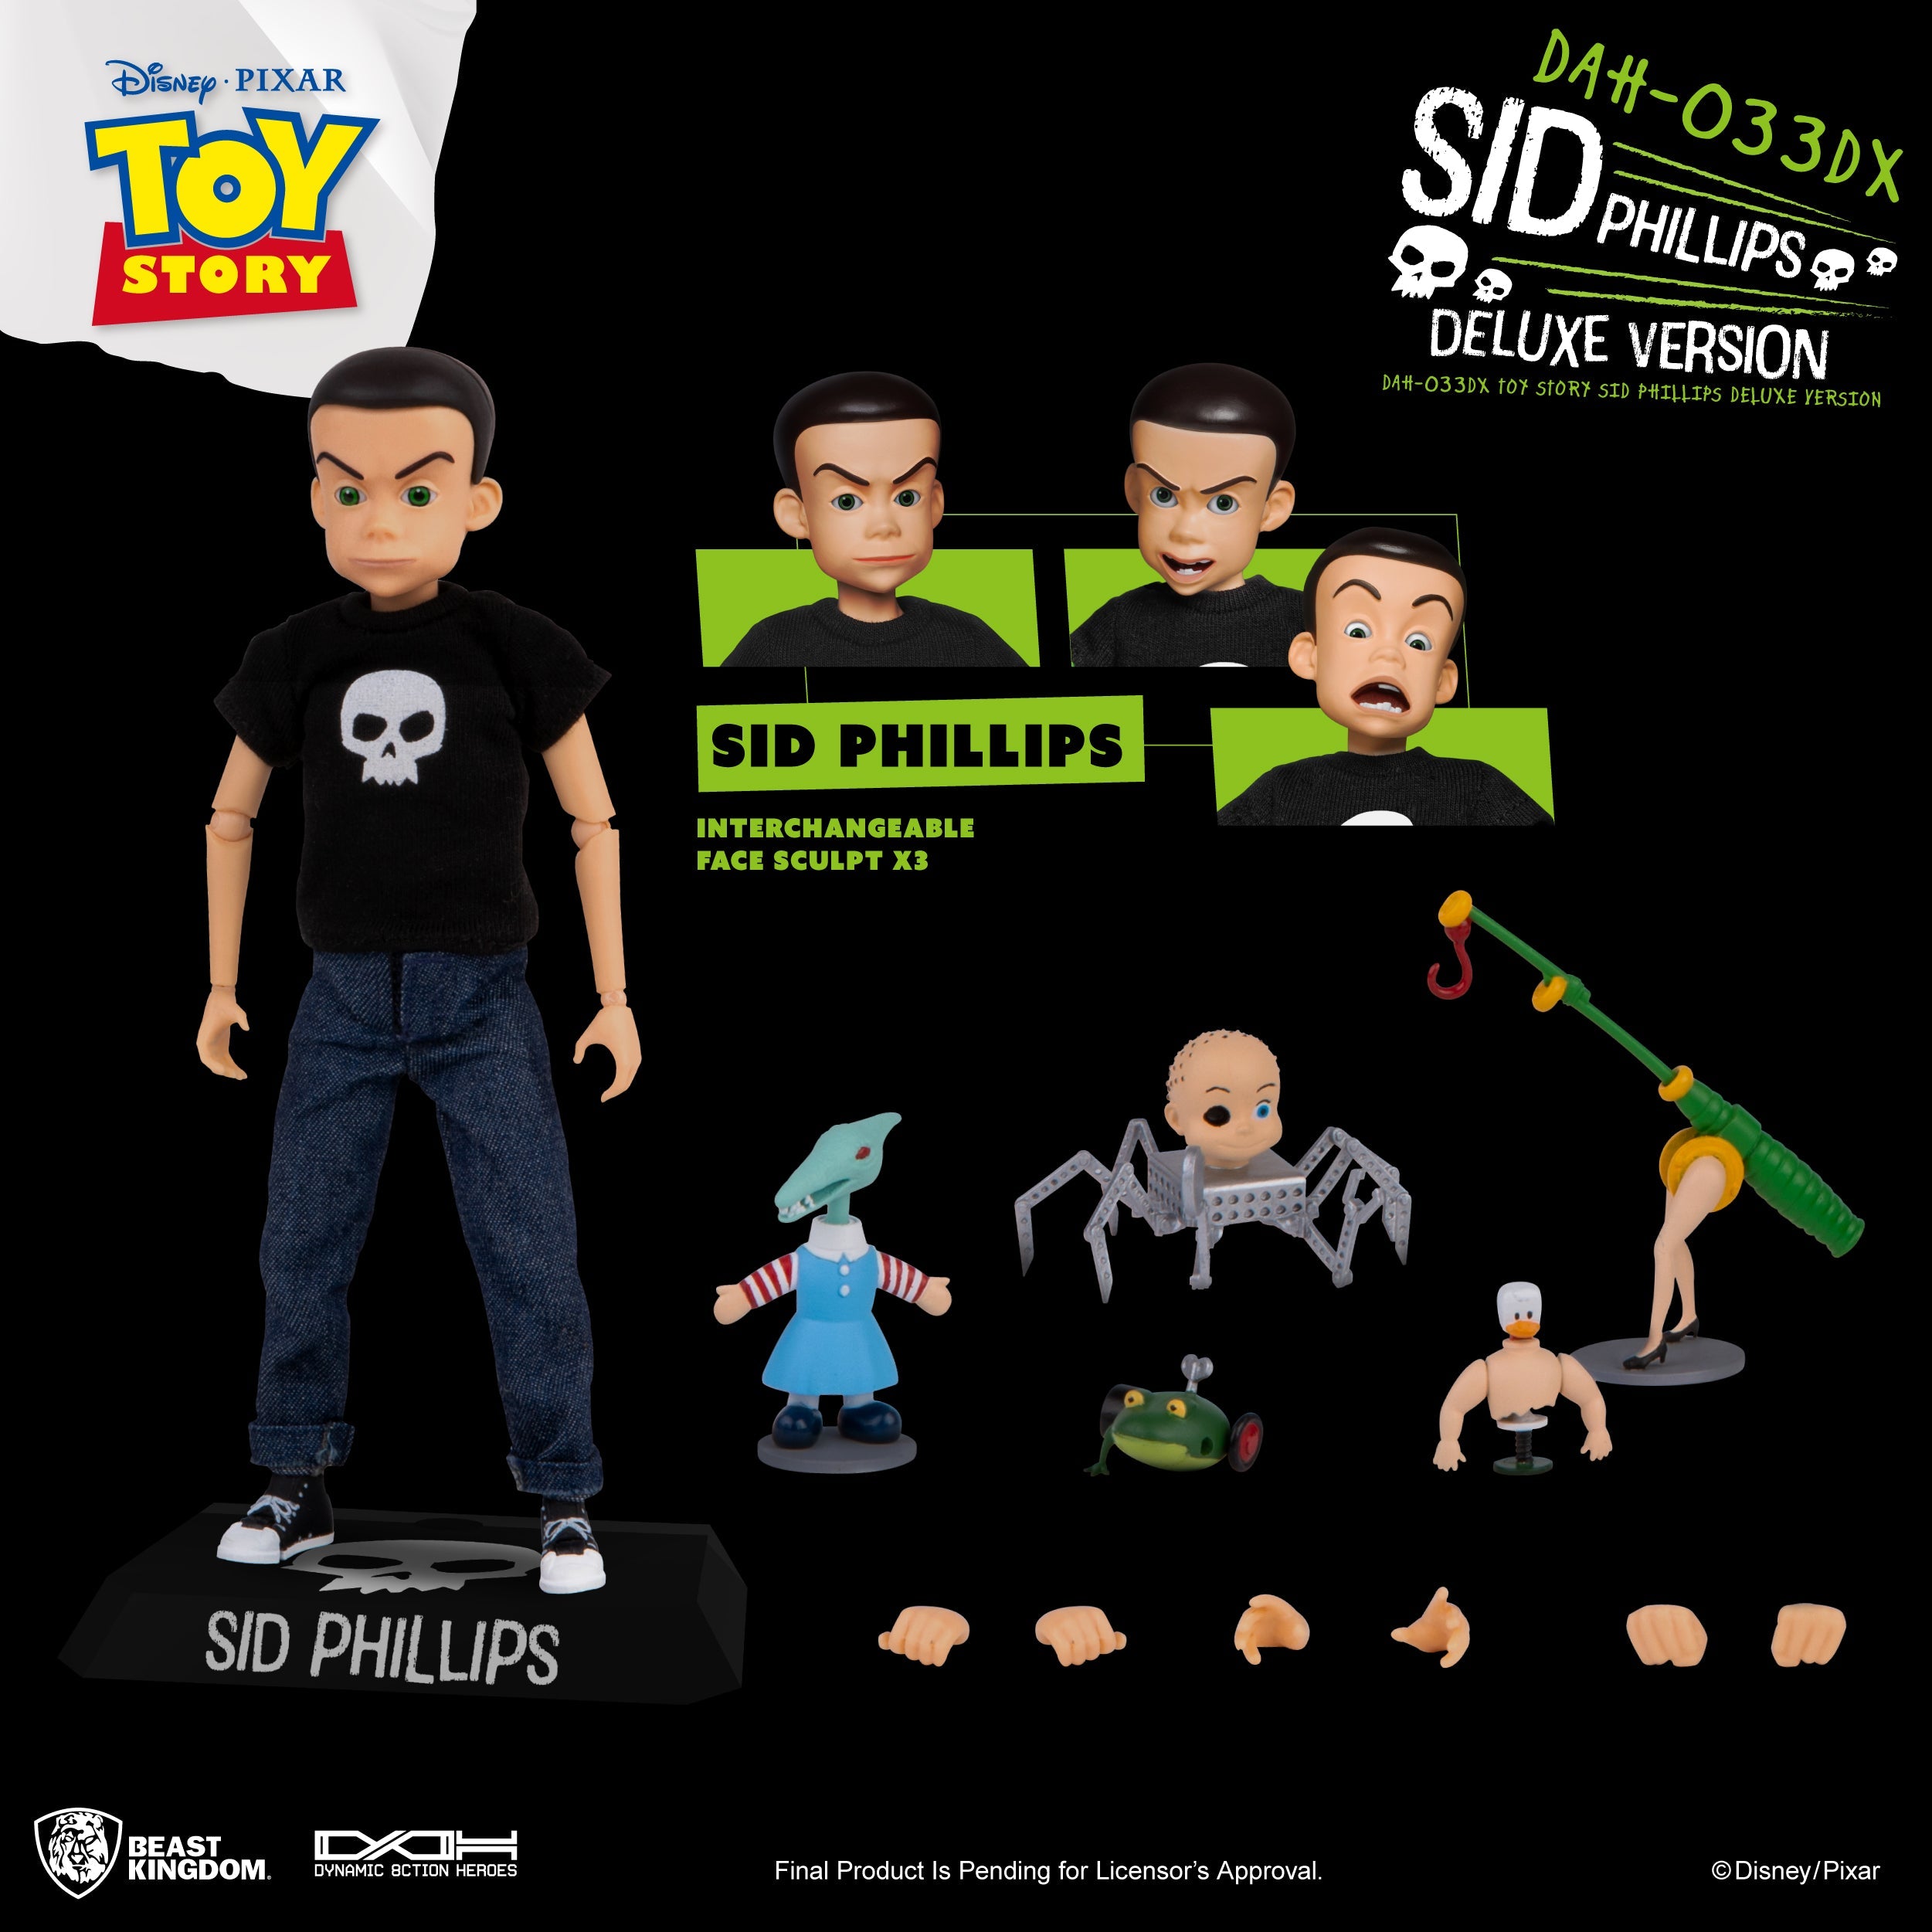 Toy Story Sid Phillips Action Figure by Beast Kingdom